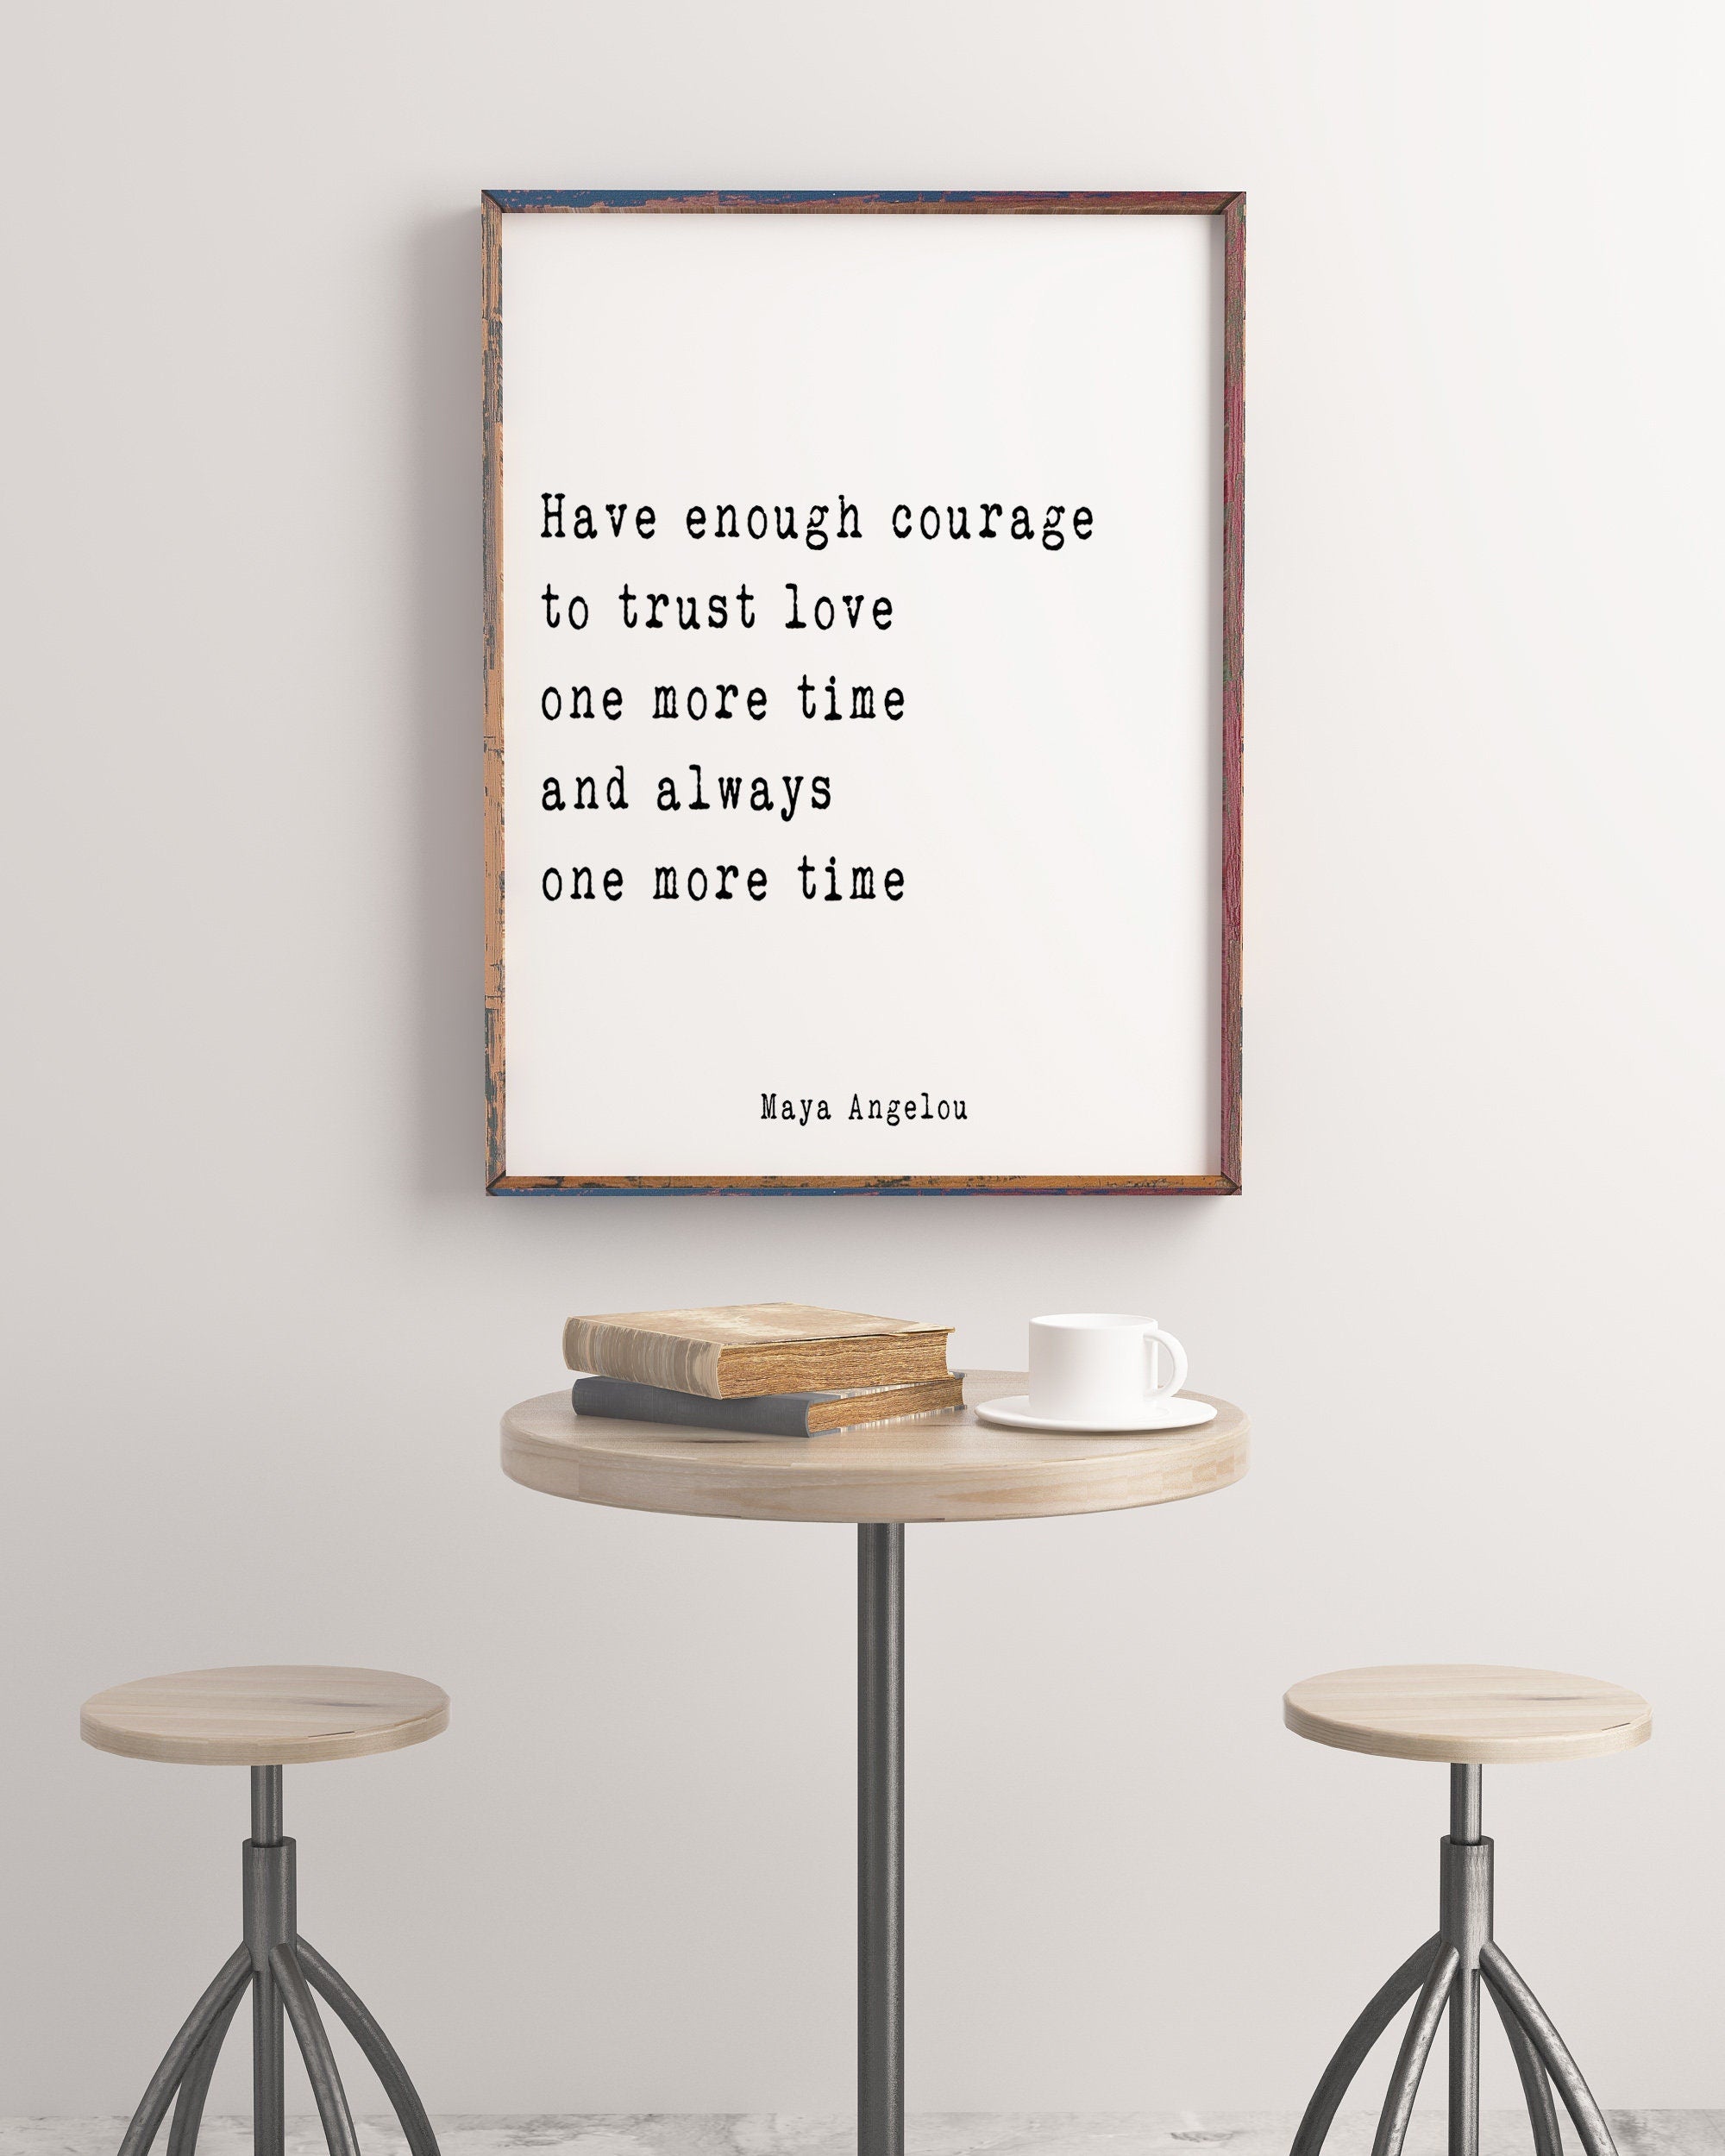 Maya Angelou Quote Print, Have enough courage to trust love